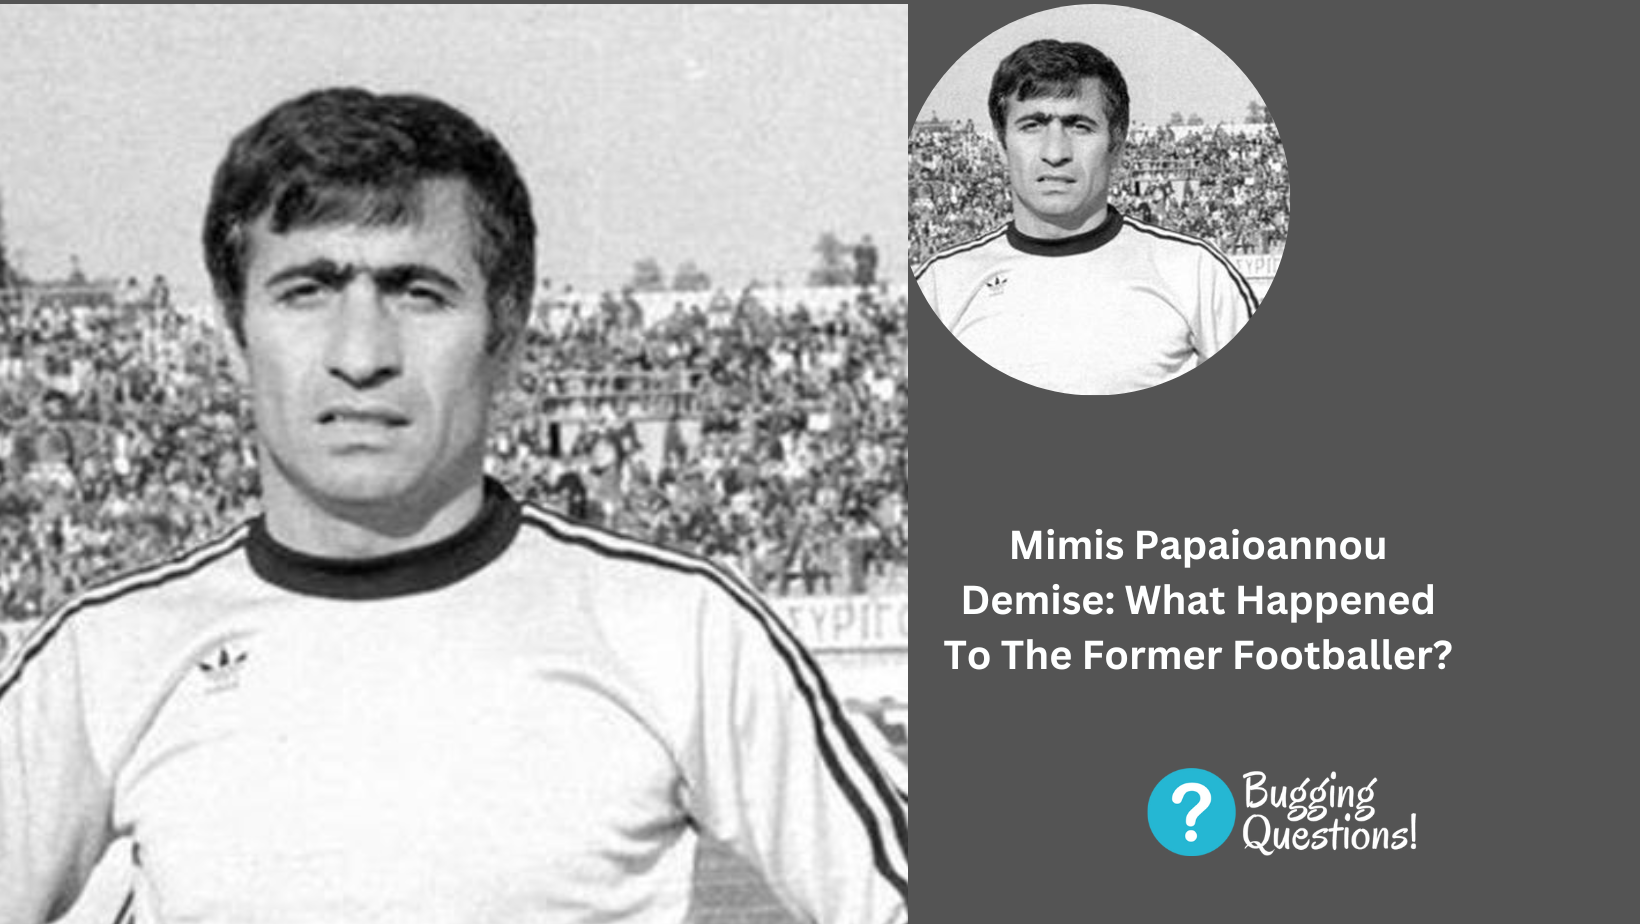 Mimis Papaioannou Demise: What Happened To The Former Footballer?